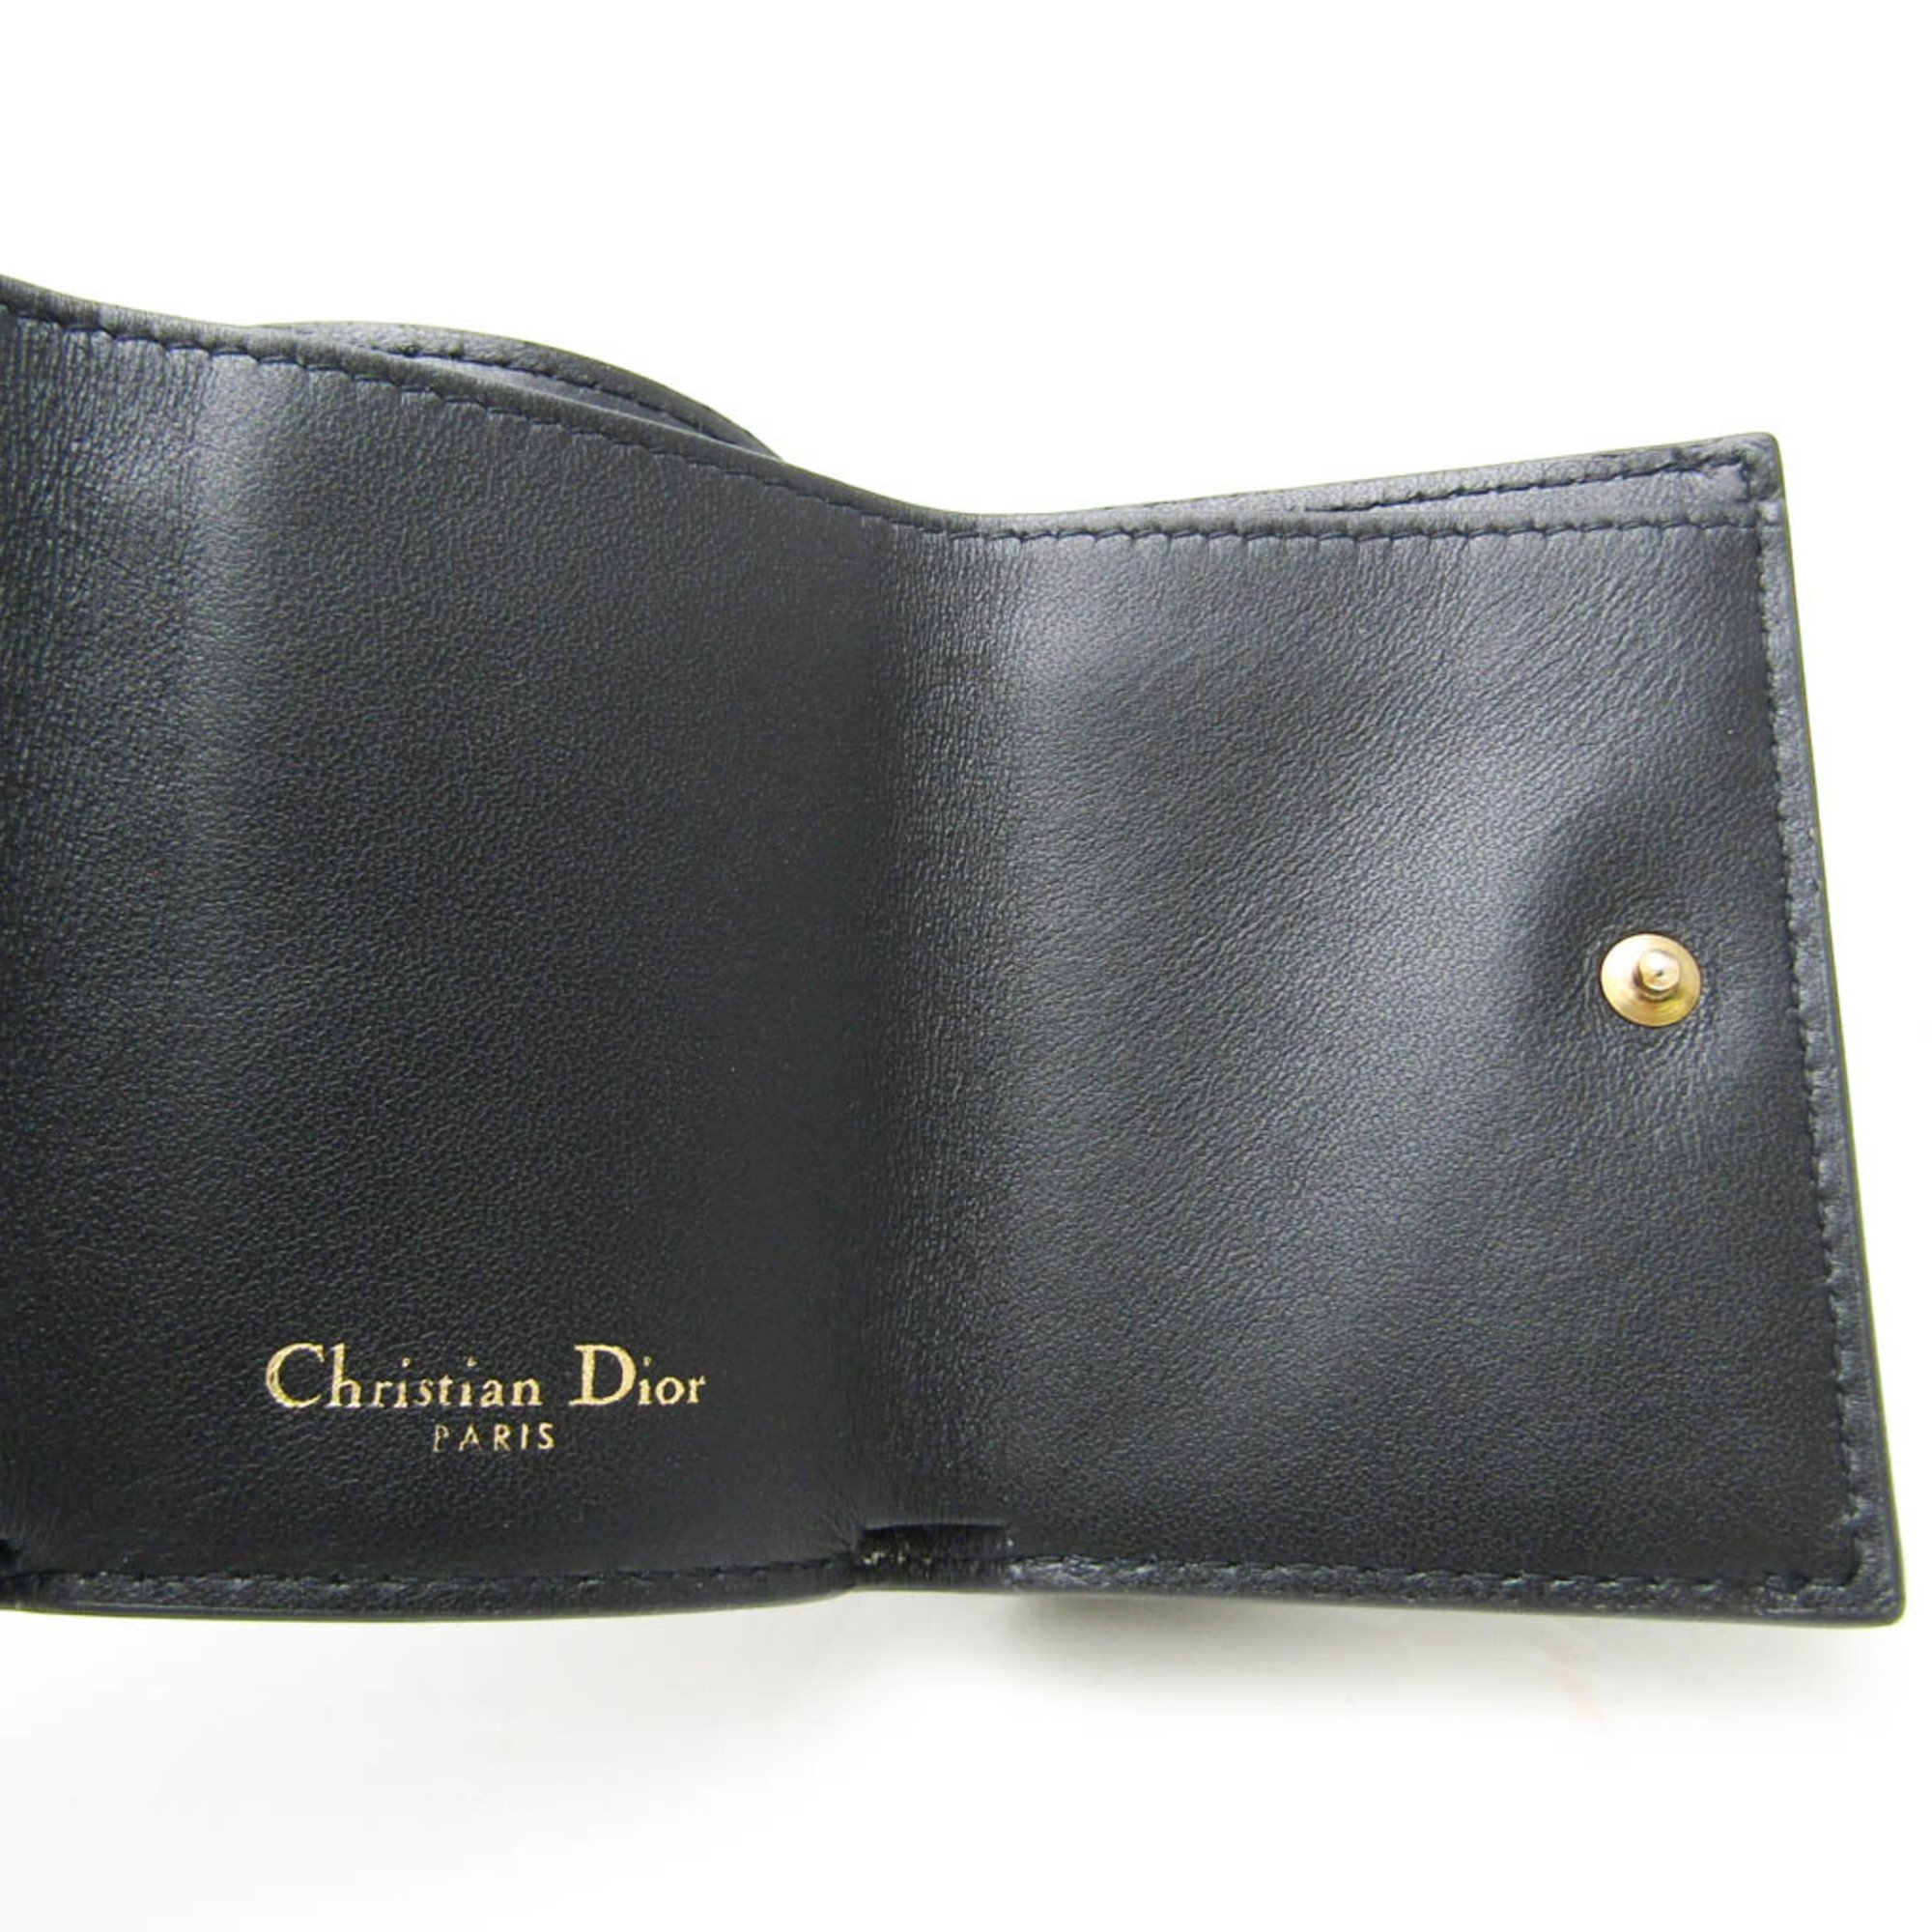 Christian Dior Saddle Compact Wallet S5653CBAA Women's Leather Wallet (tri-fold) Black